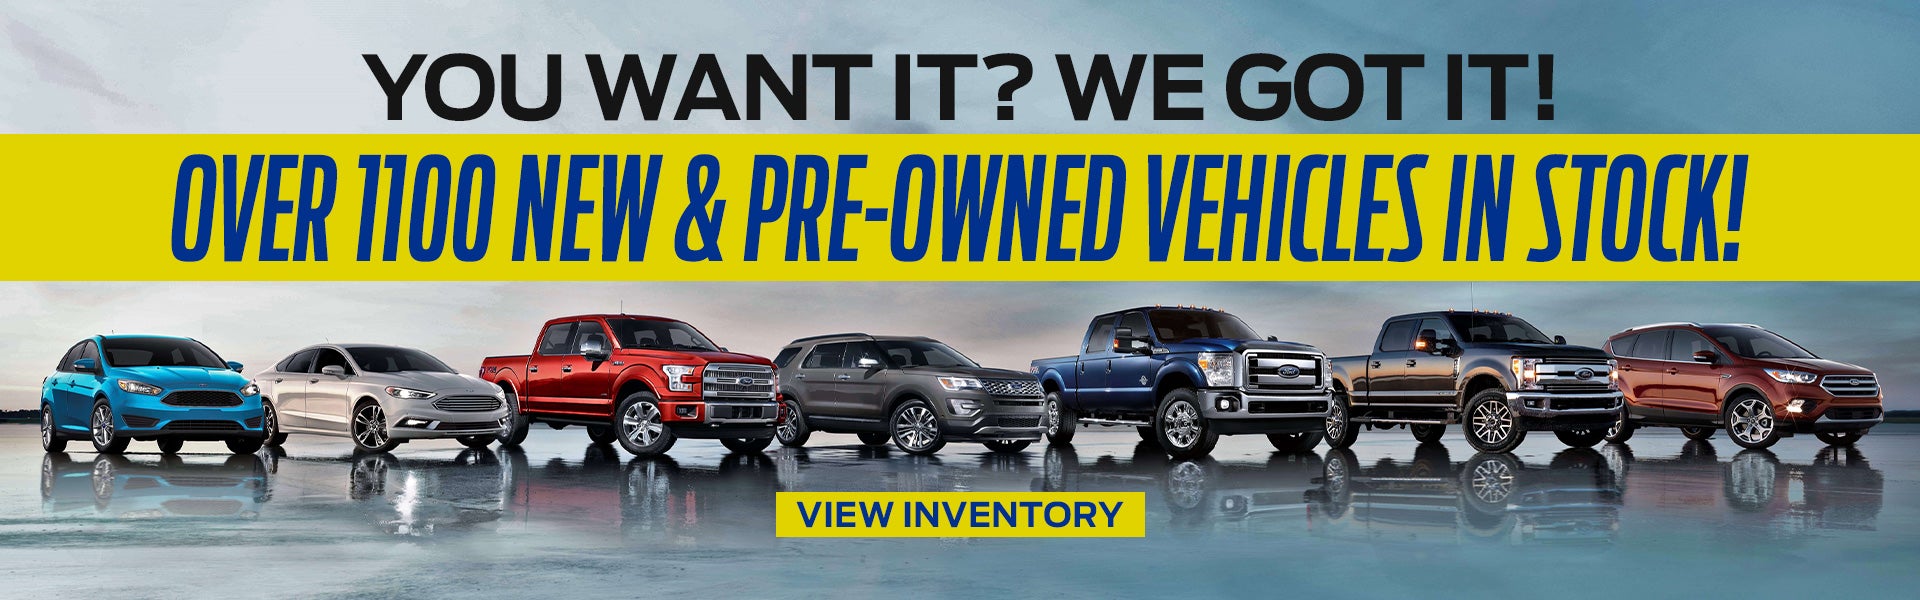 Over 1100 Vehicles in Stock